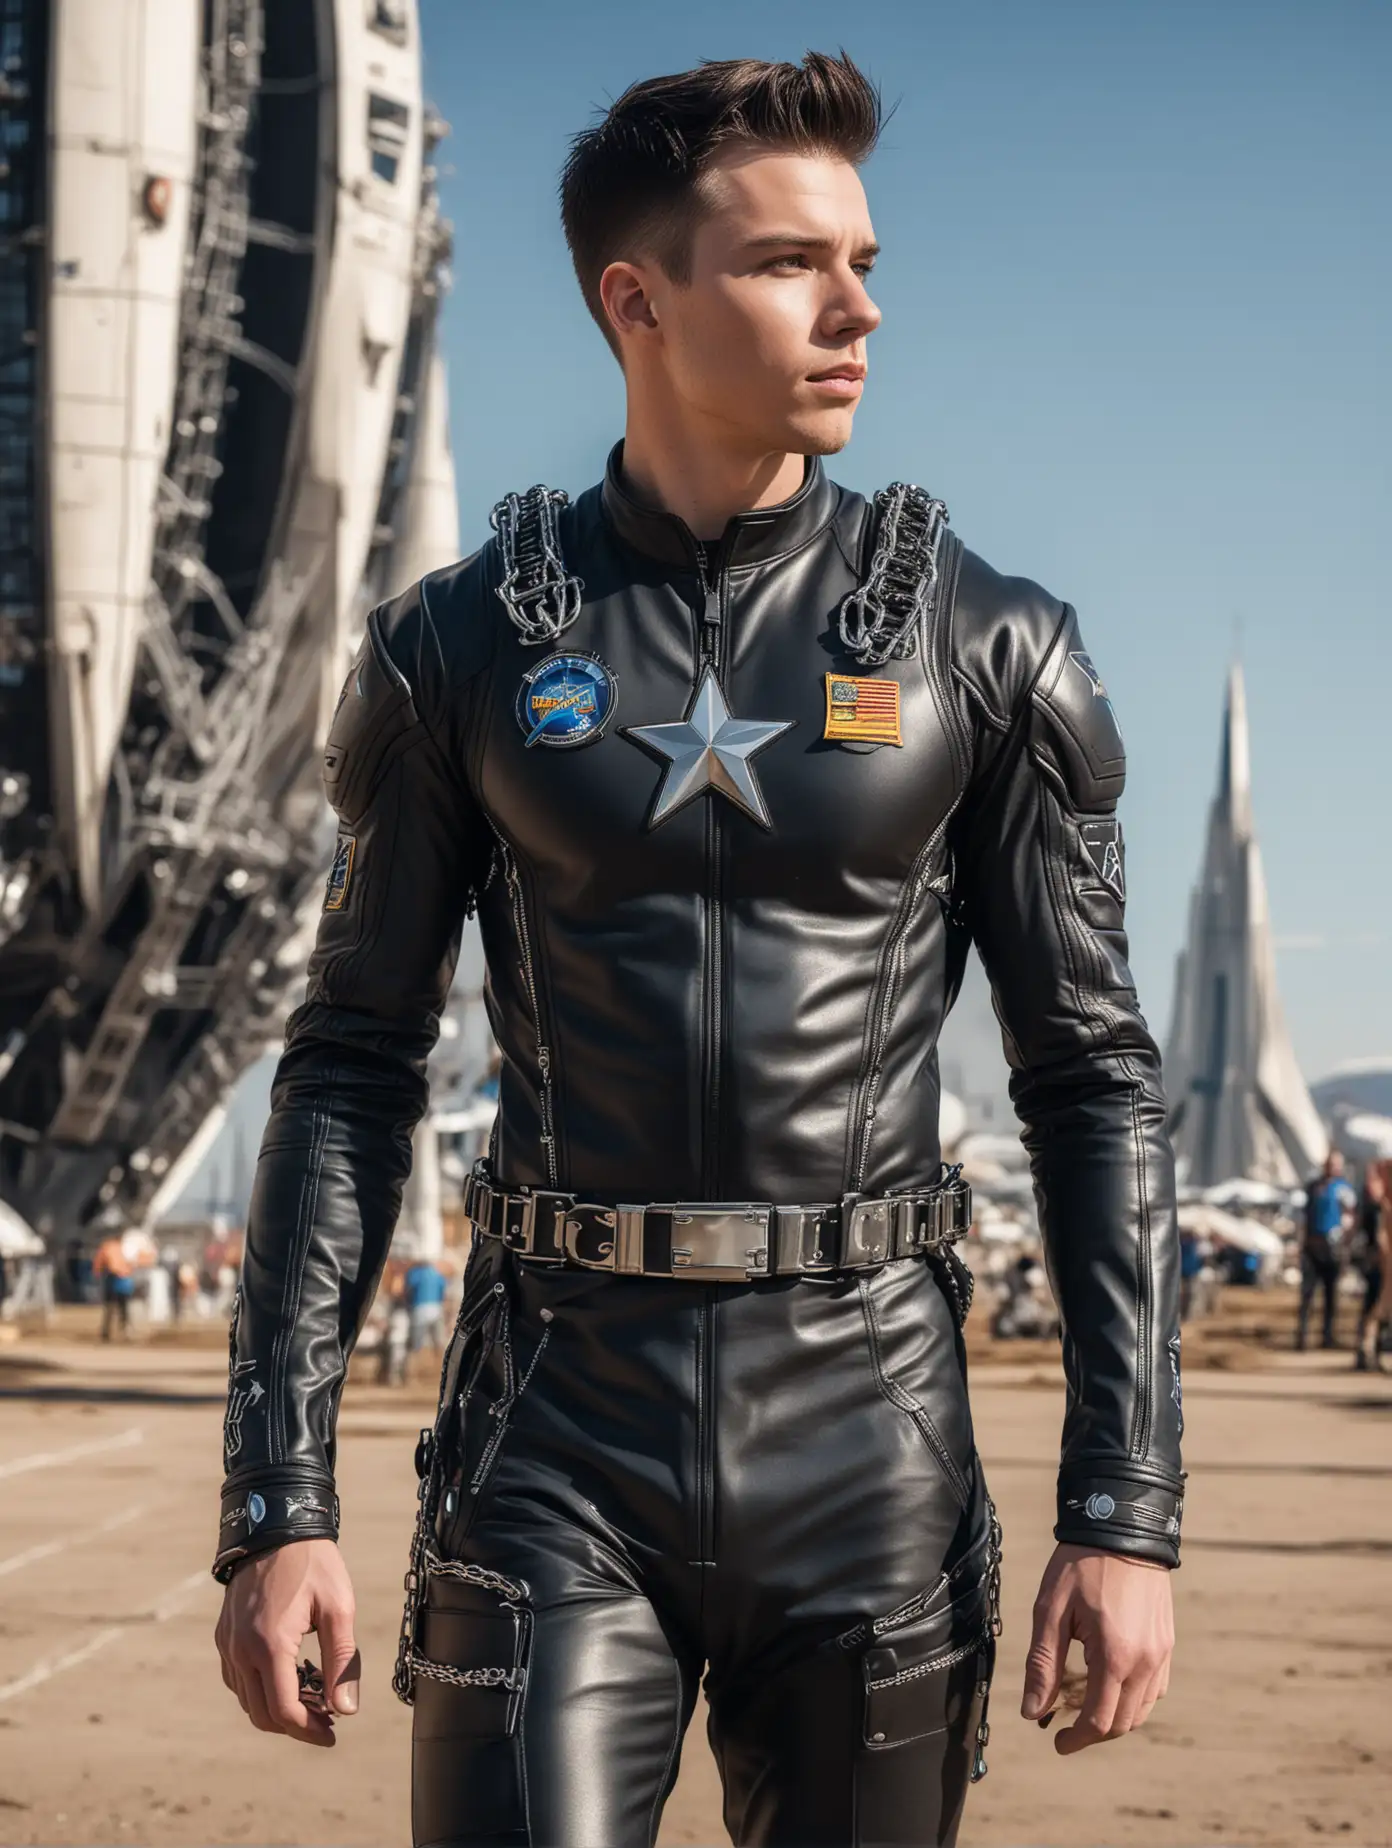 Muscular young white man, dark hair, tight fitting black leather space cadet uniform, star logo on chest, large groin bulge accentuated with straps, zips and chains, walks across the spaceport, outdoors towards futuristic space craft, with the towers of the city in the background, bright sun and blue sky